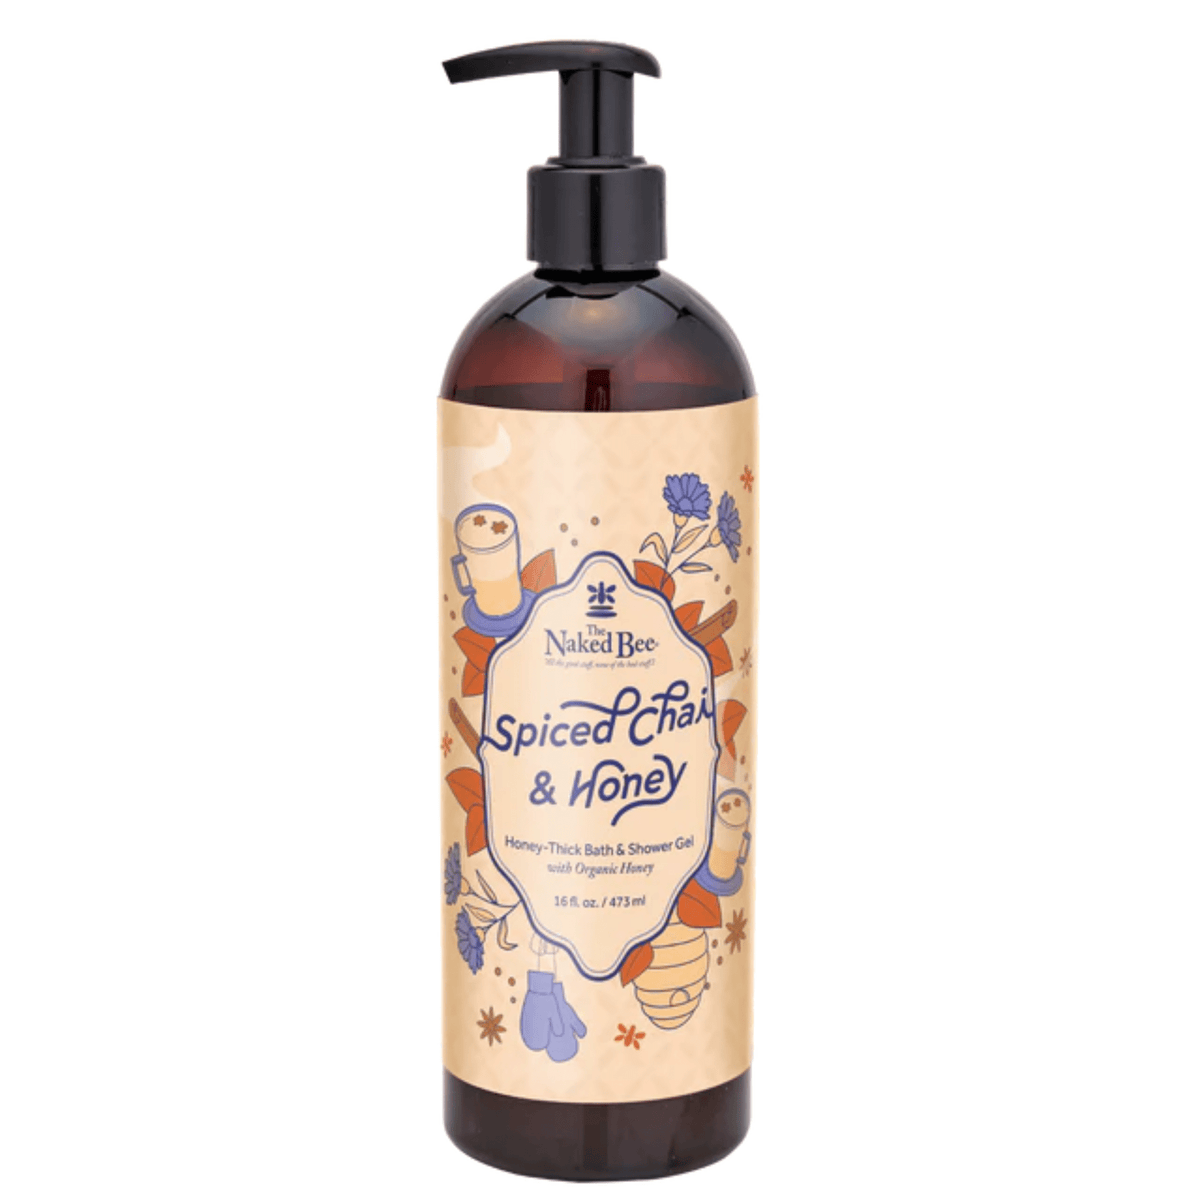 Primary Image of Spiced Chai & Honey Shower Gel